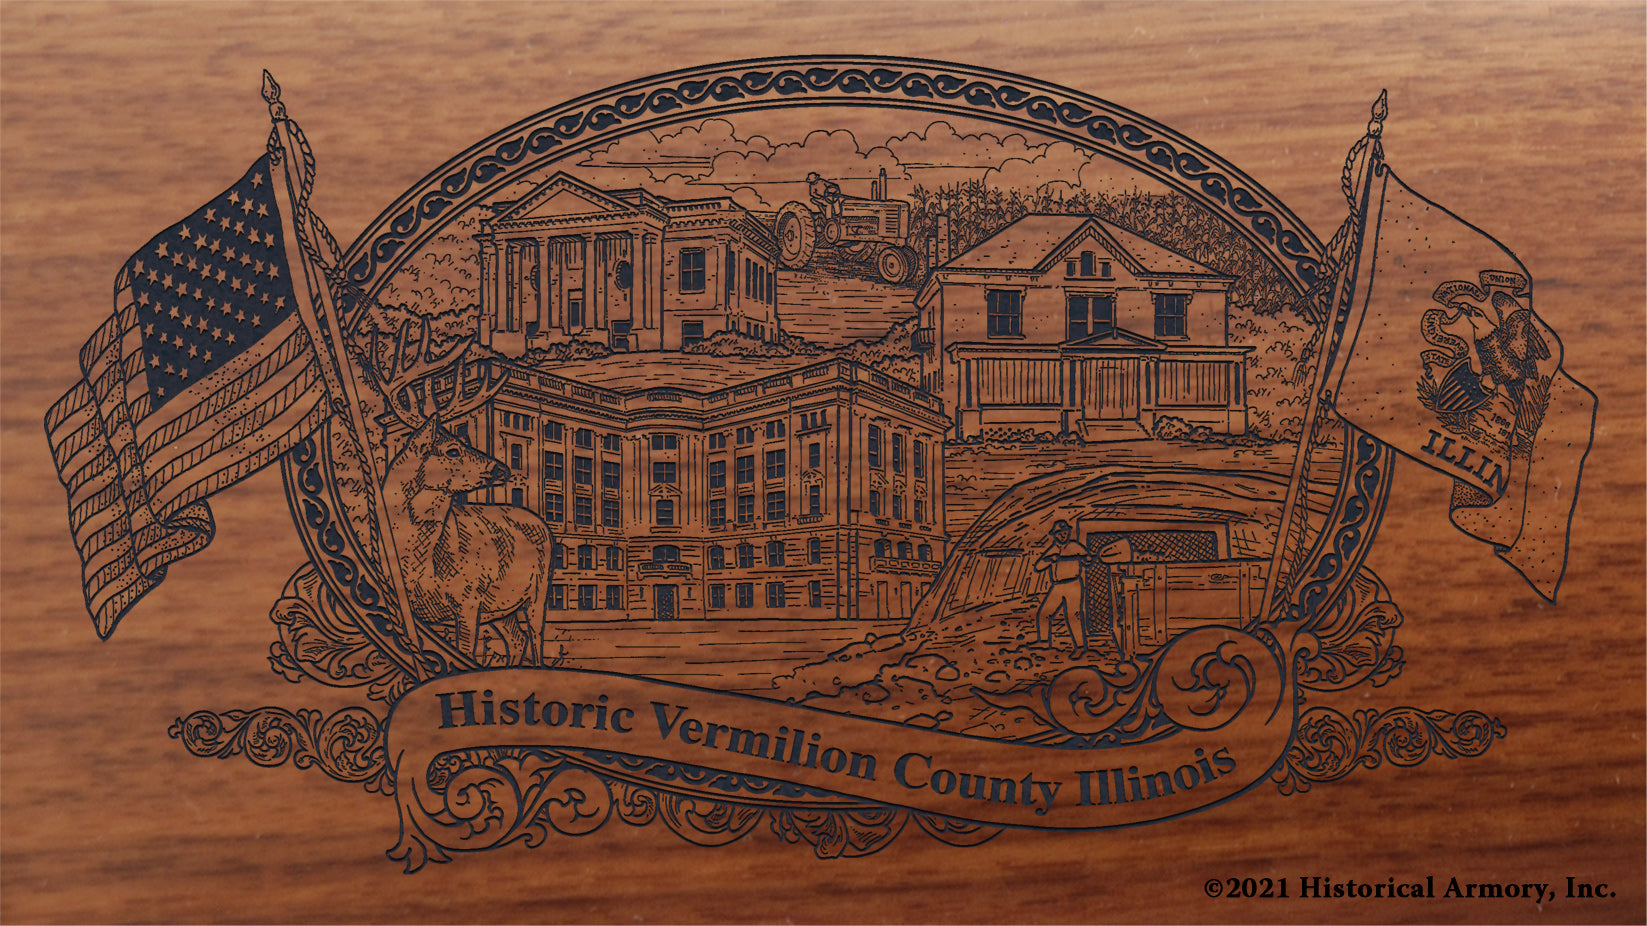 Engraved artwork | History of Vermilion County Illinois | Historical Armory